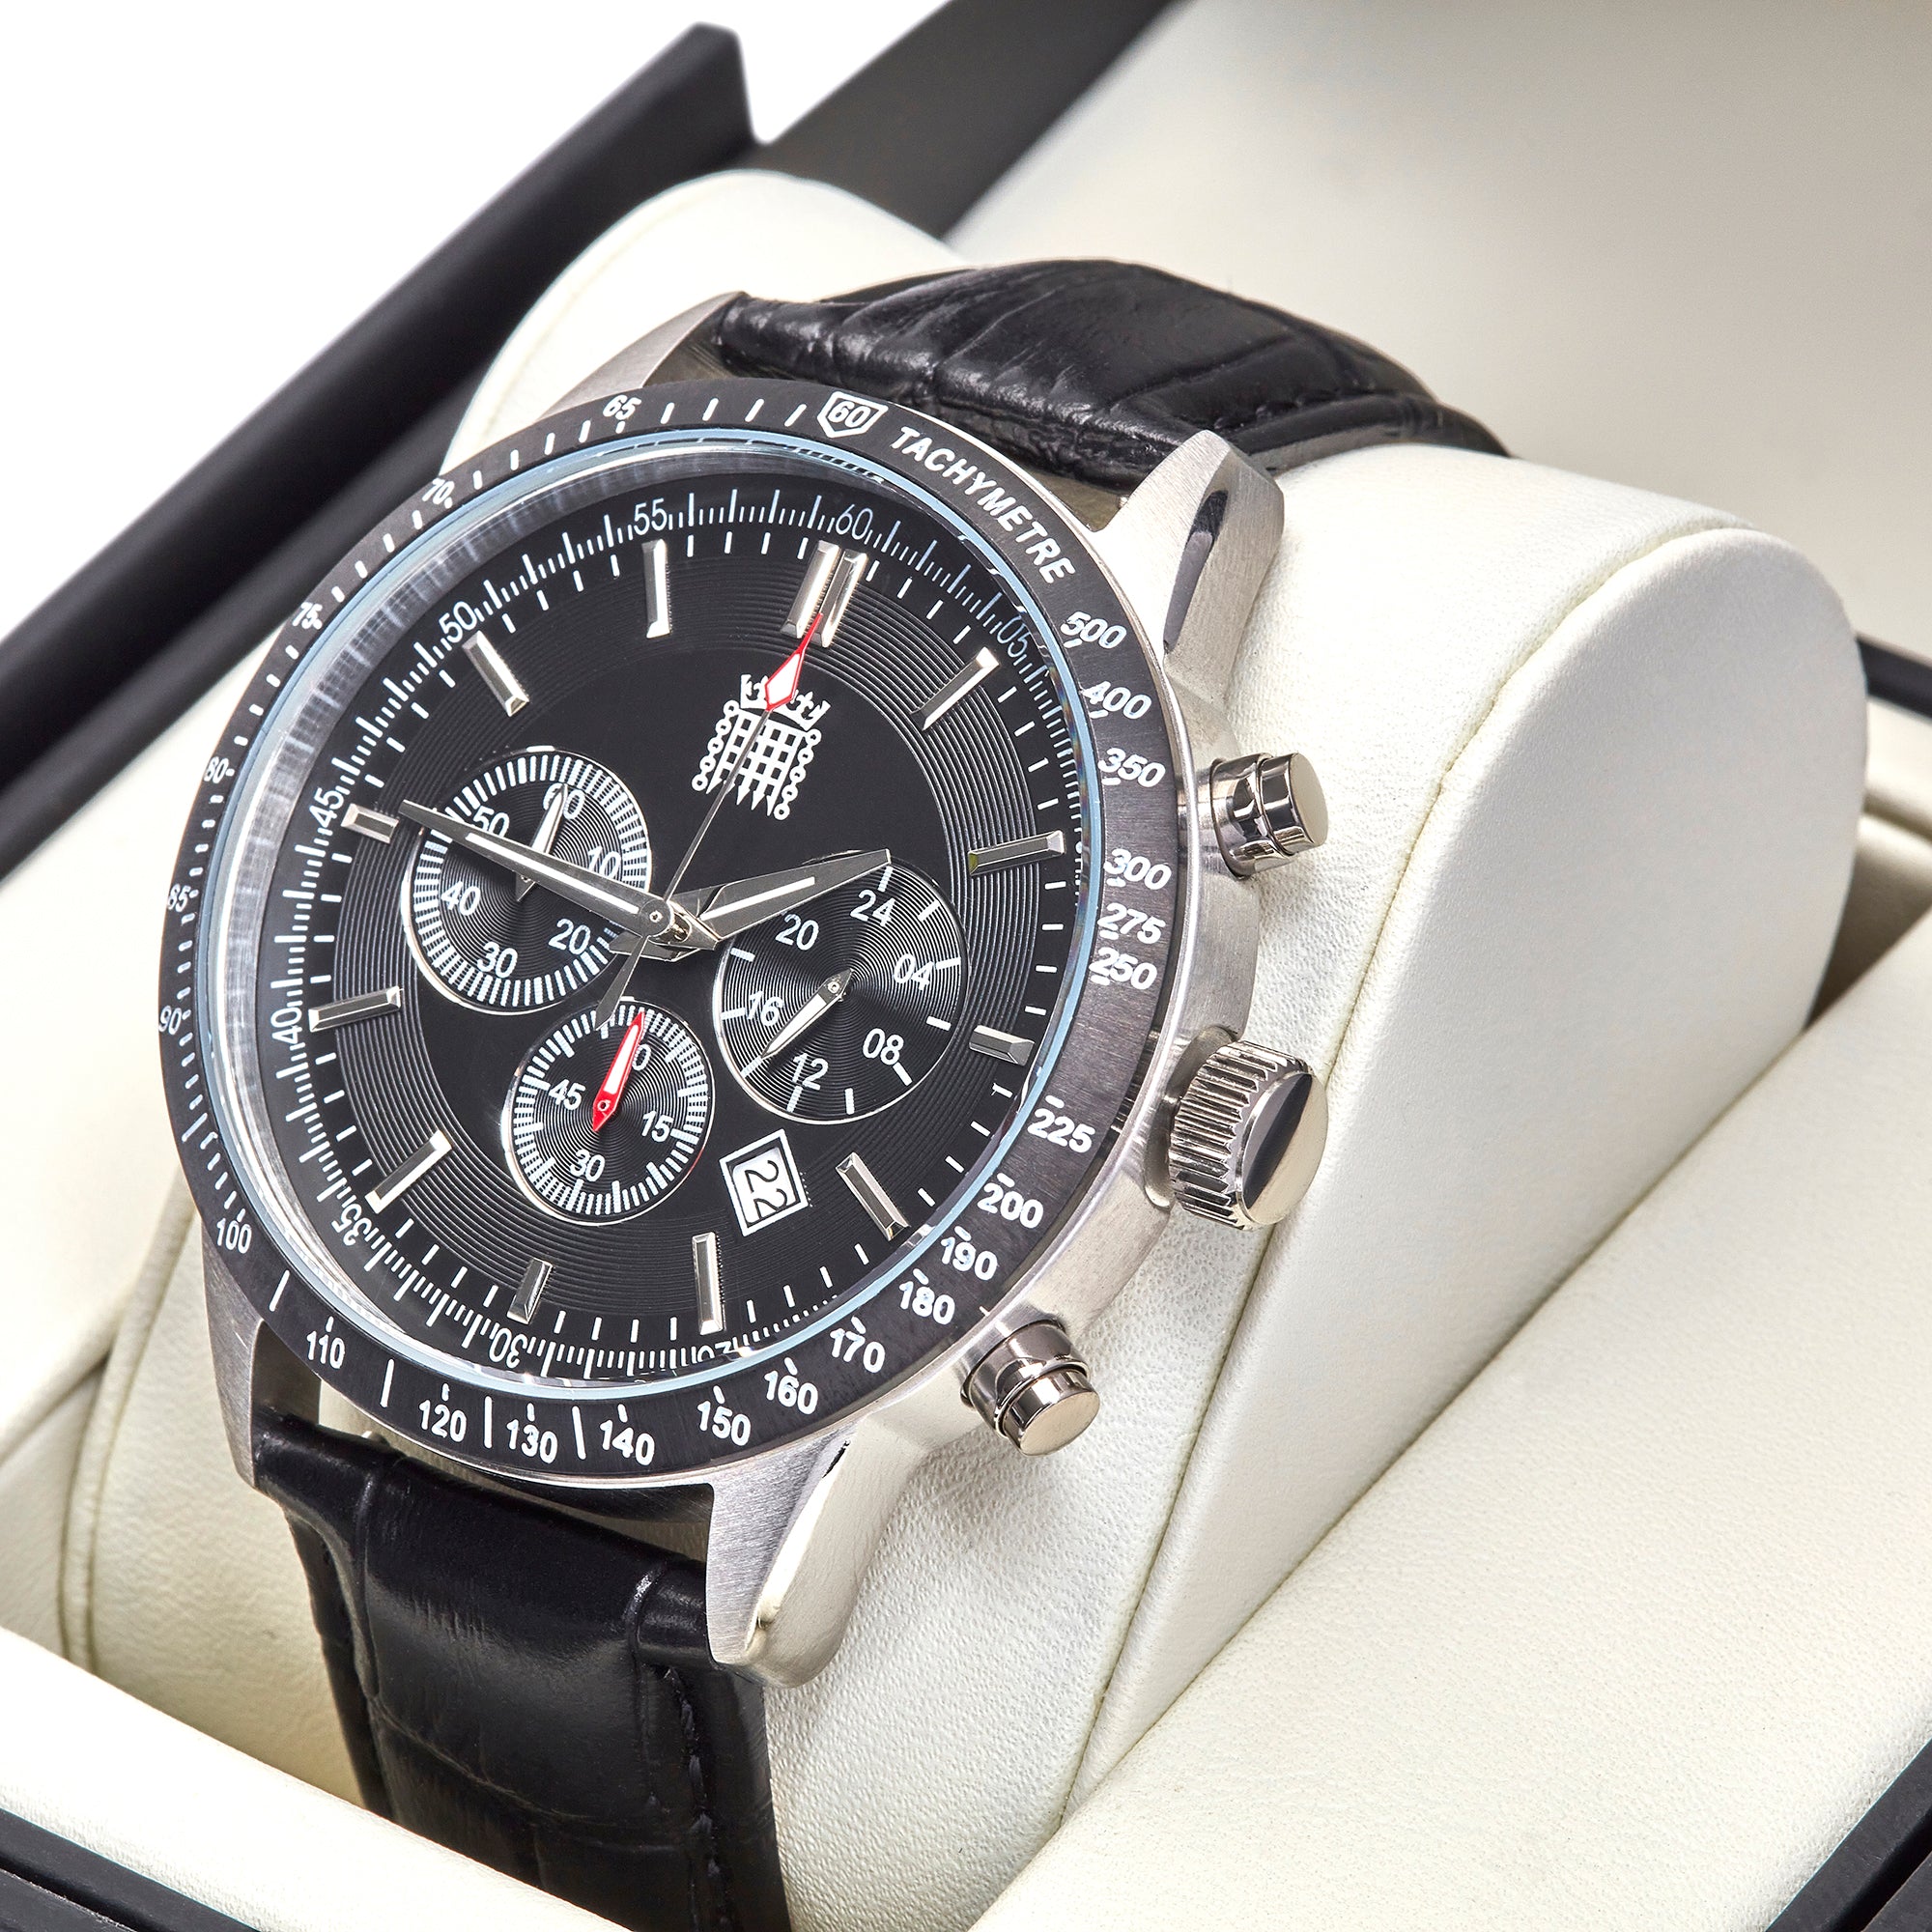 Men's Multi-Function Watch with Black Leather Strap